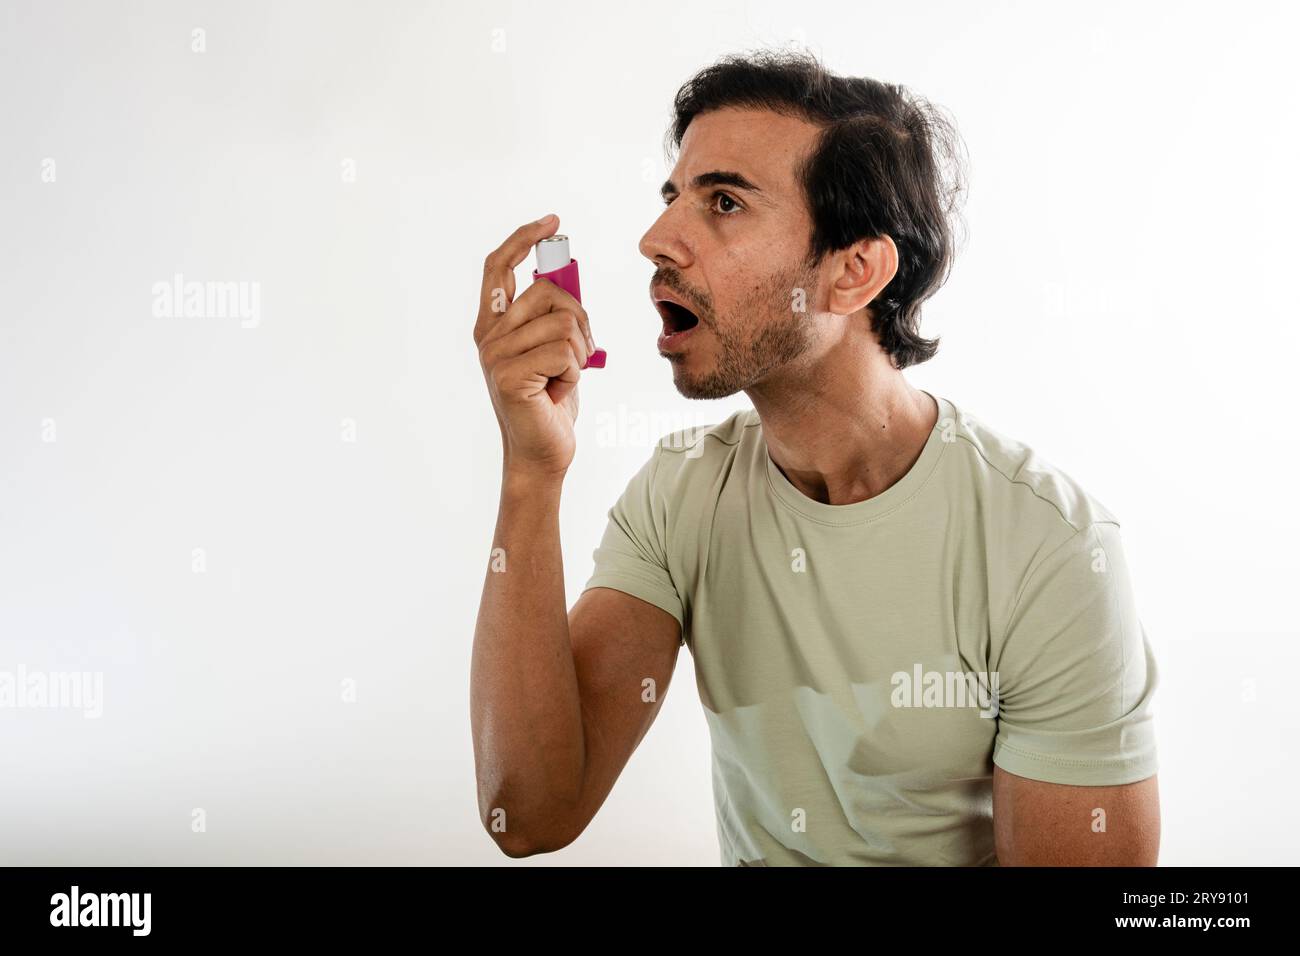 Asian young man from india using a respiratory inhaler. Study shot on white background, selective focus. Stock Photo